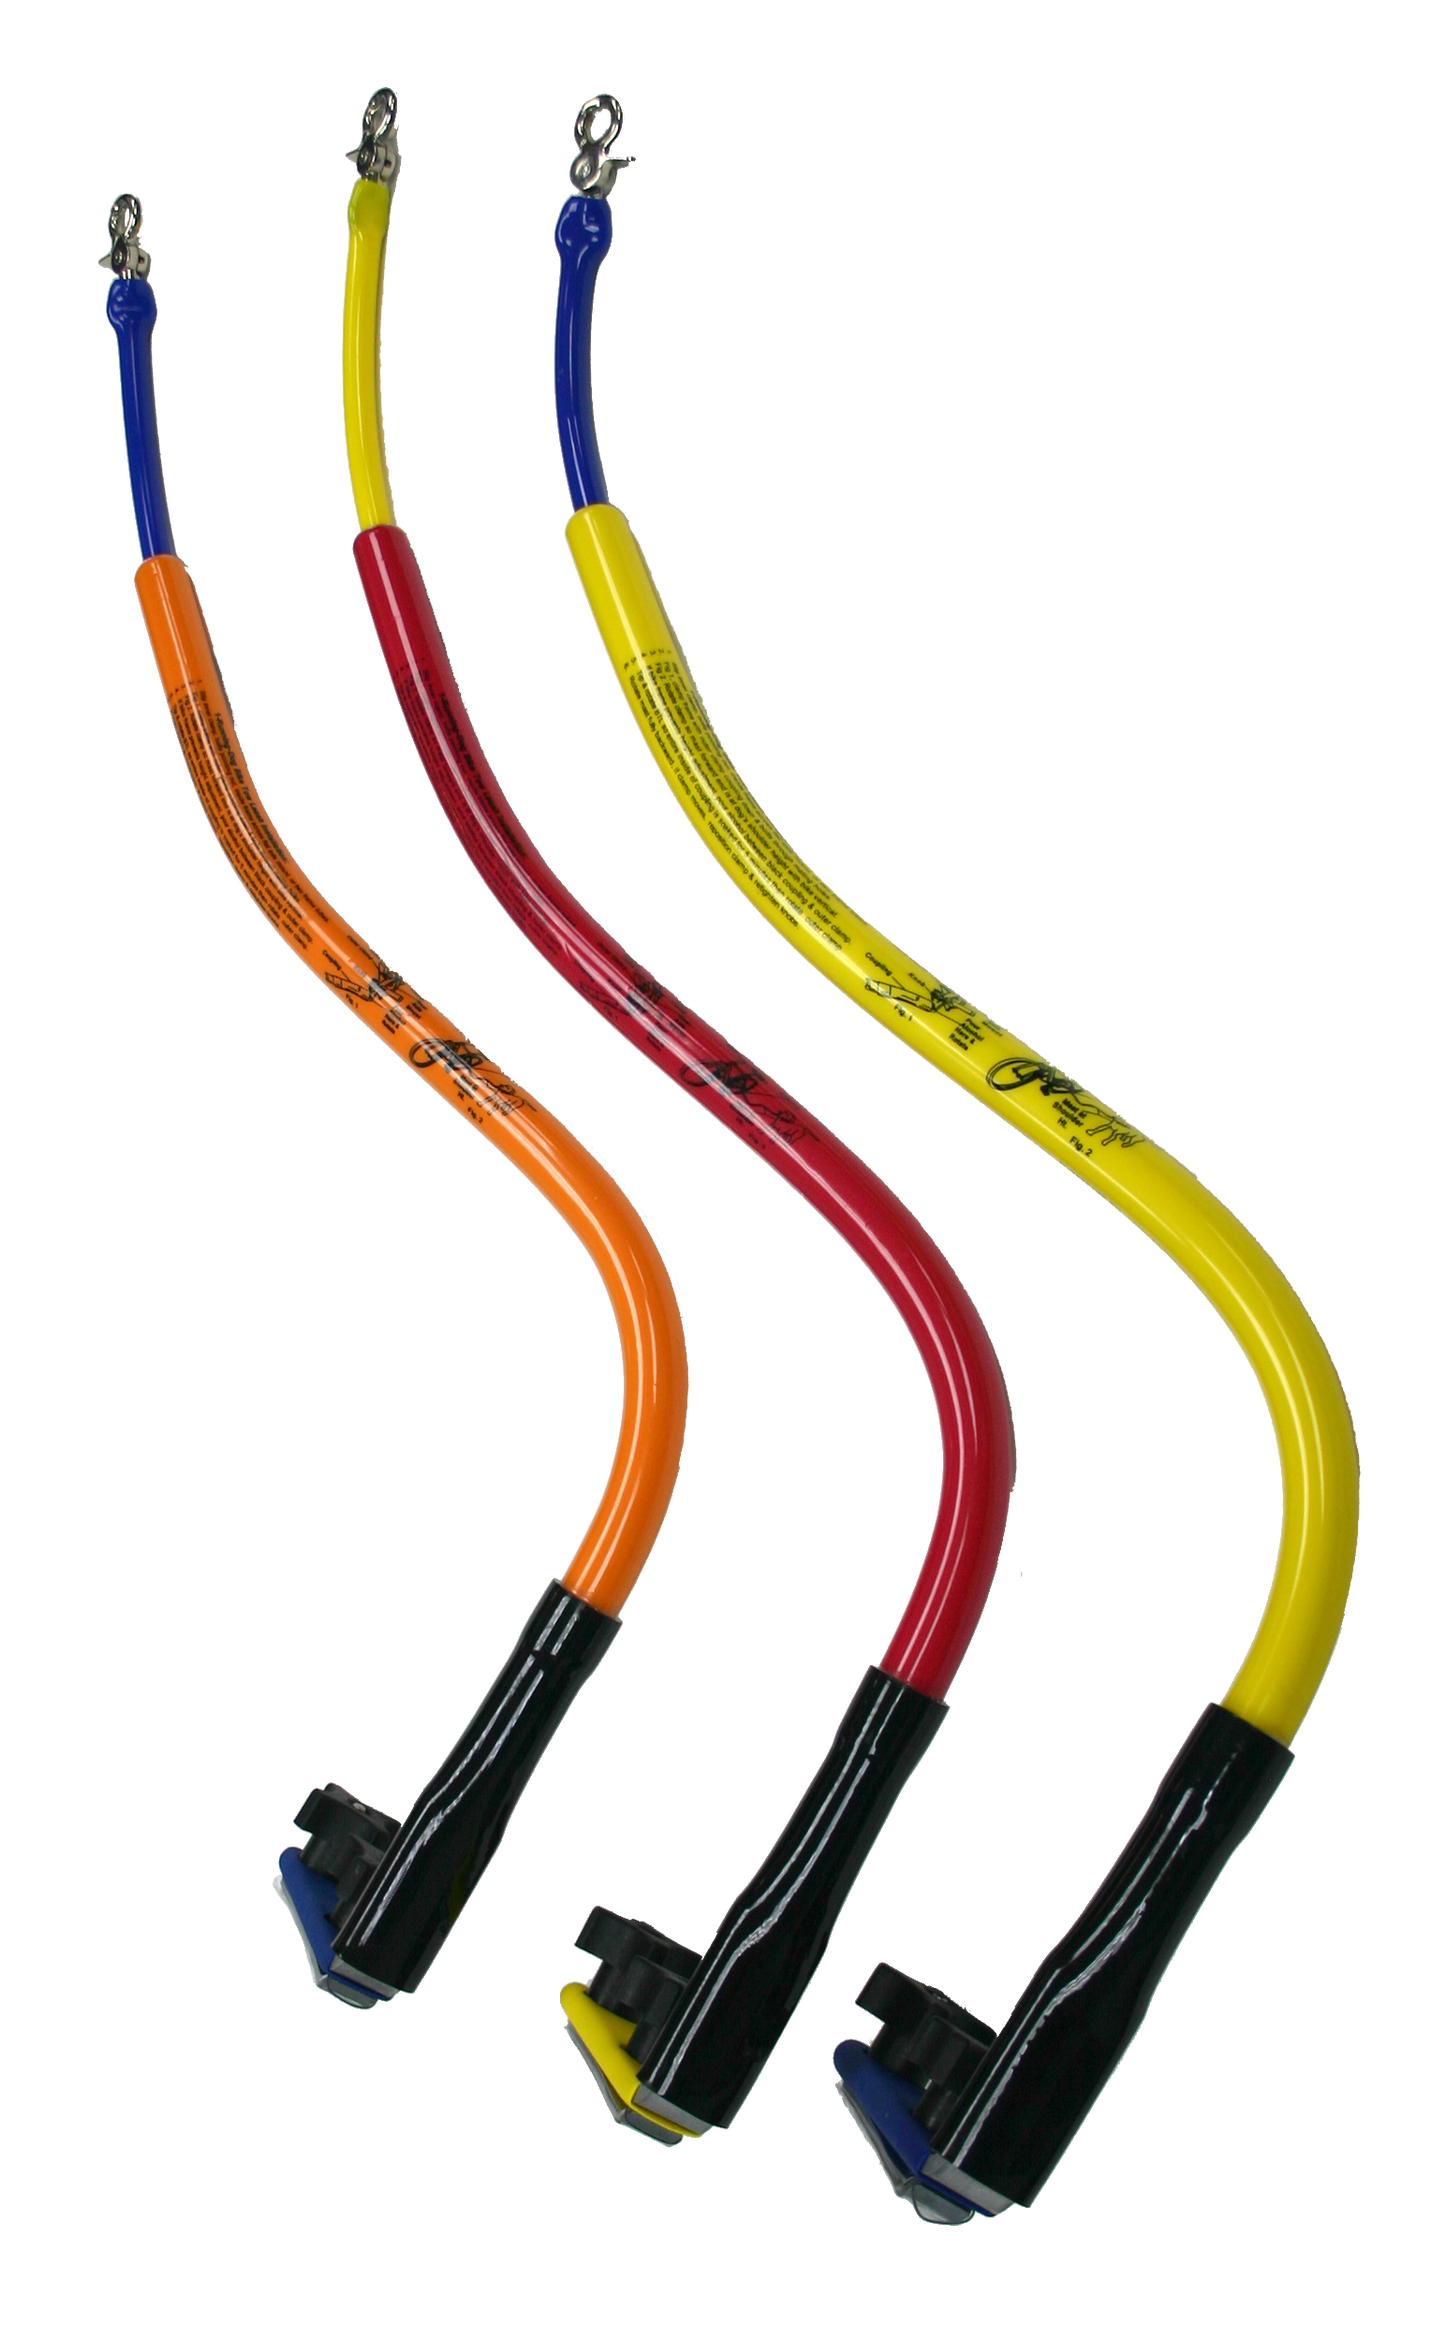 3 Bike Tow Leash® in 3 colors orange, red, and yellow on a transparent background vertically